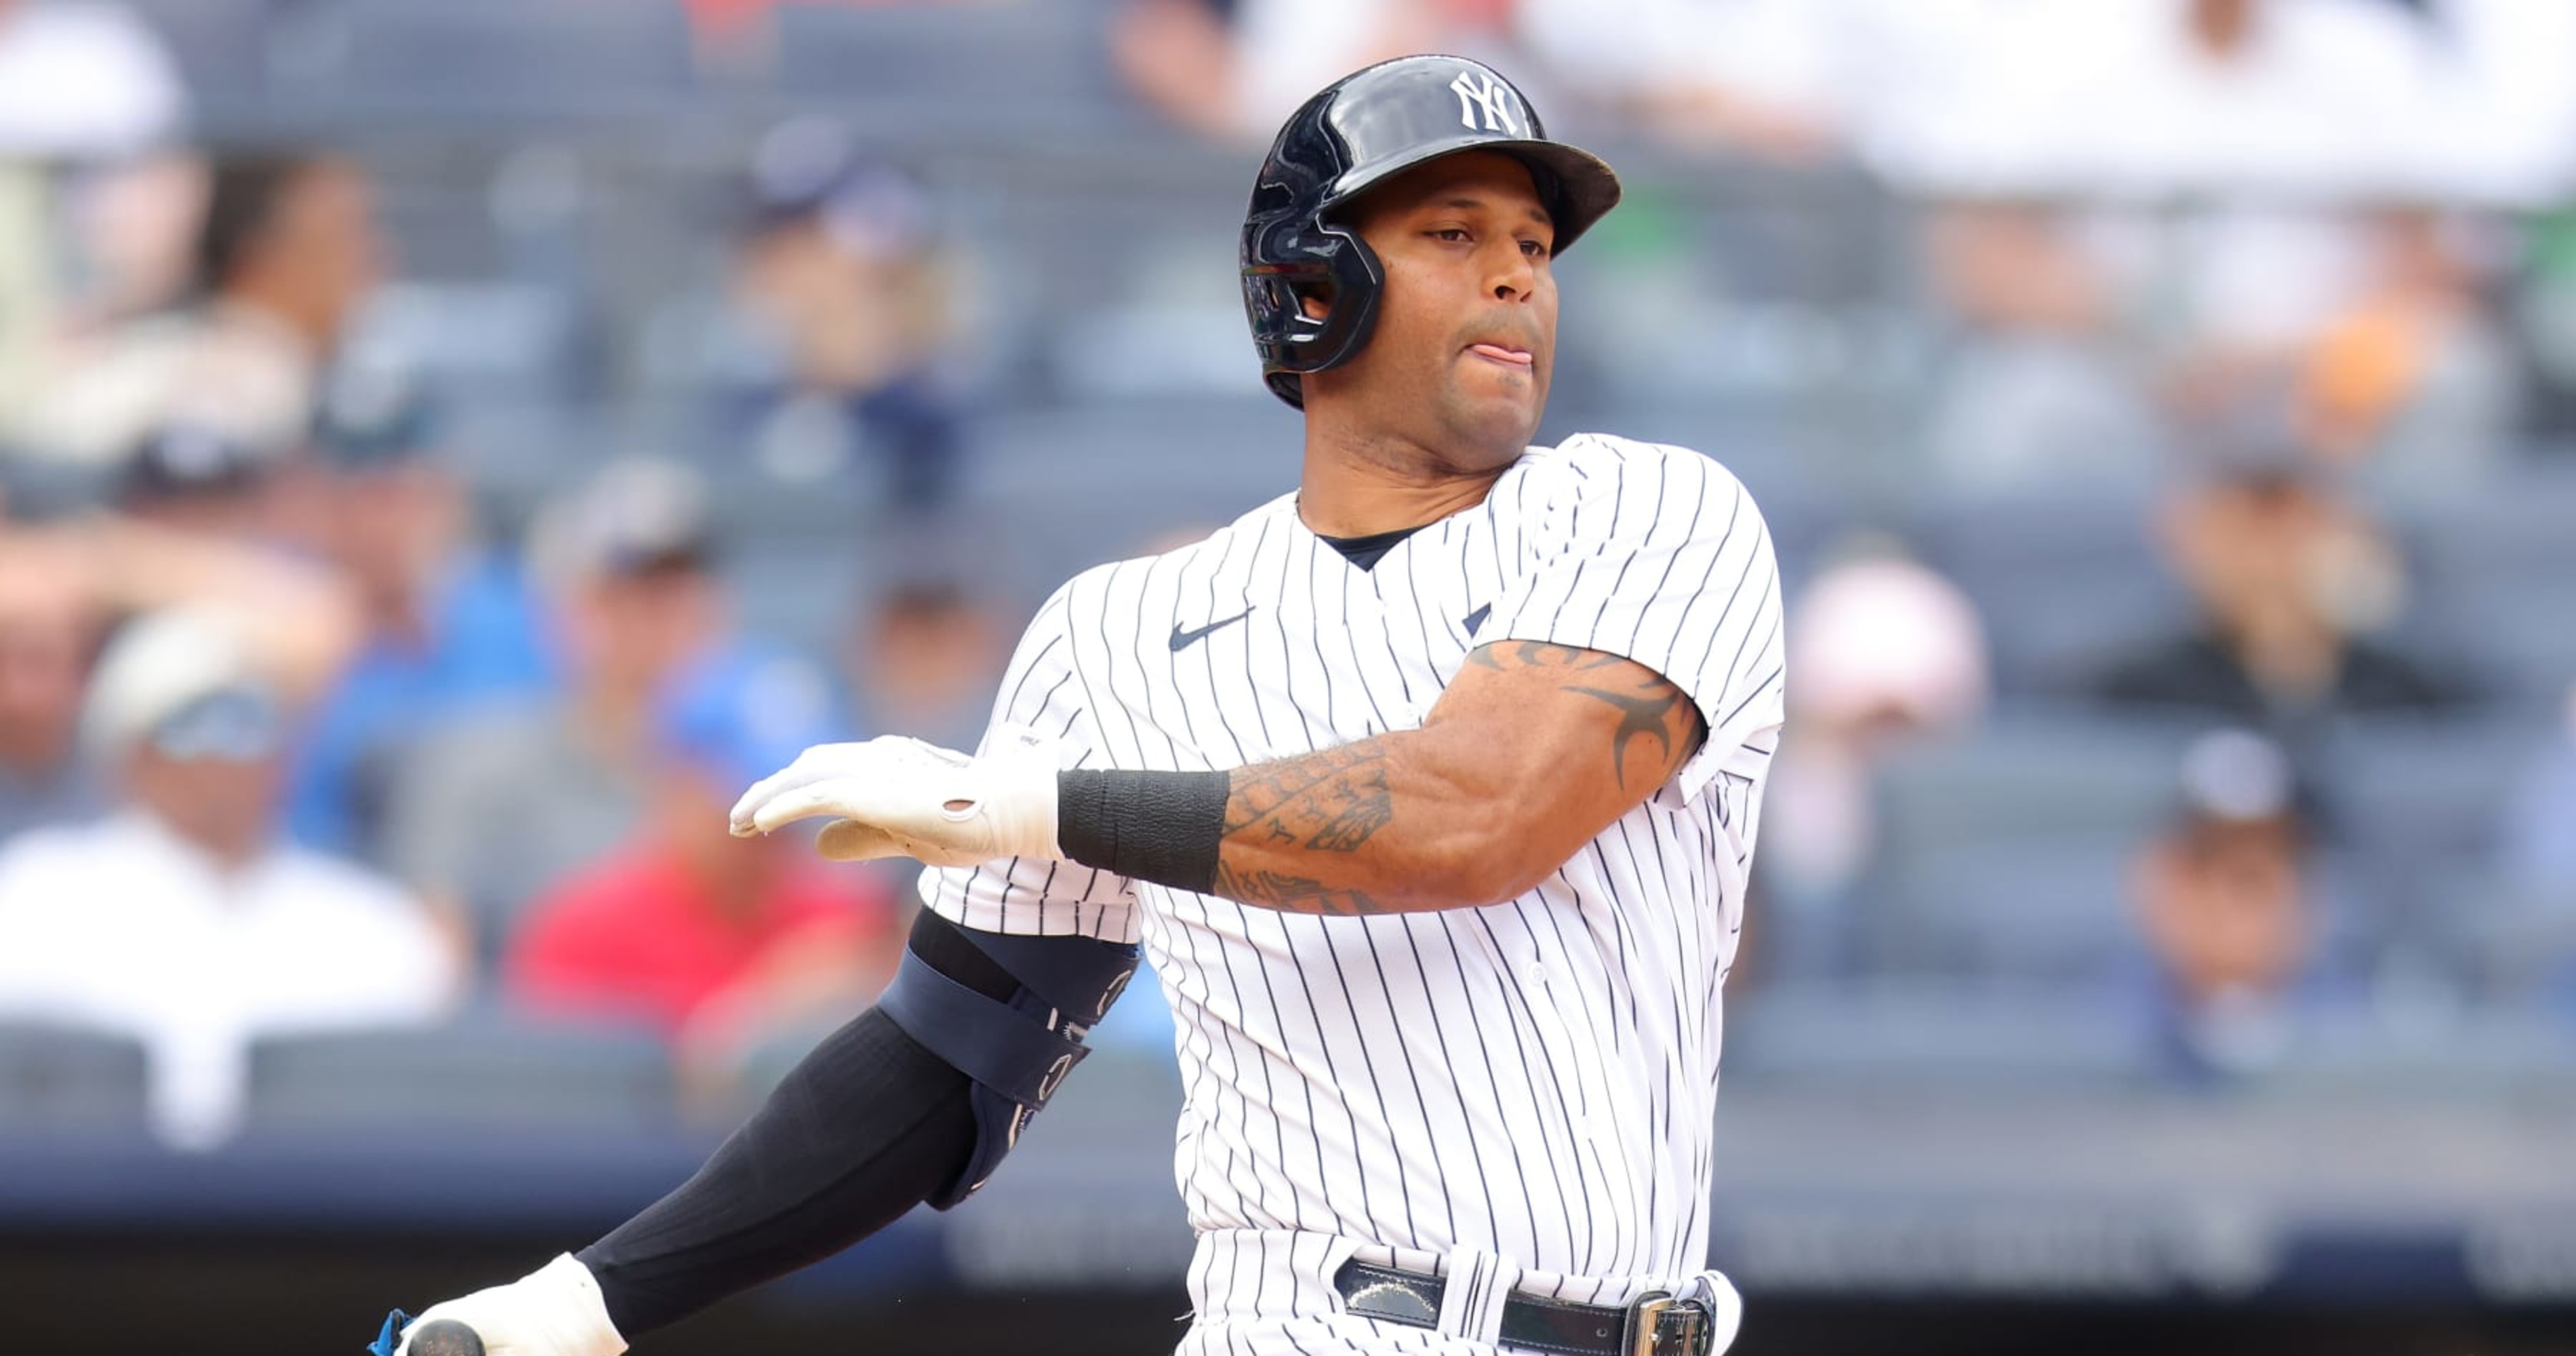 It's official: Aaron Hicks is now a former Yankee and a free agent